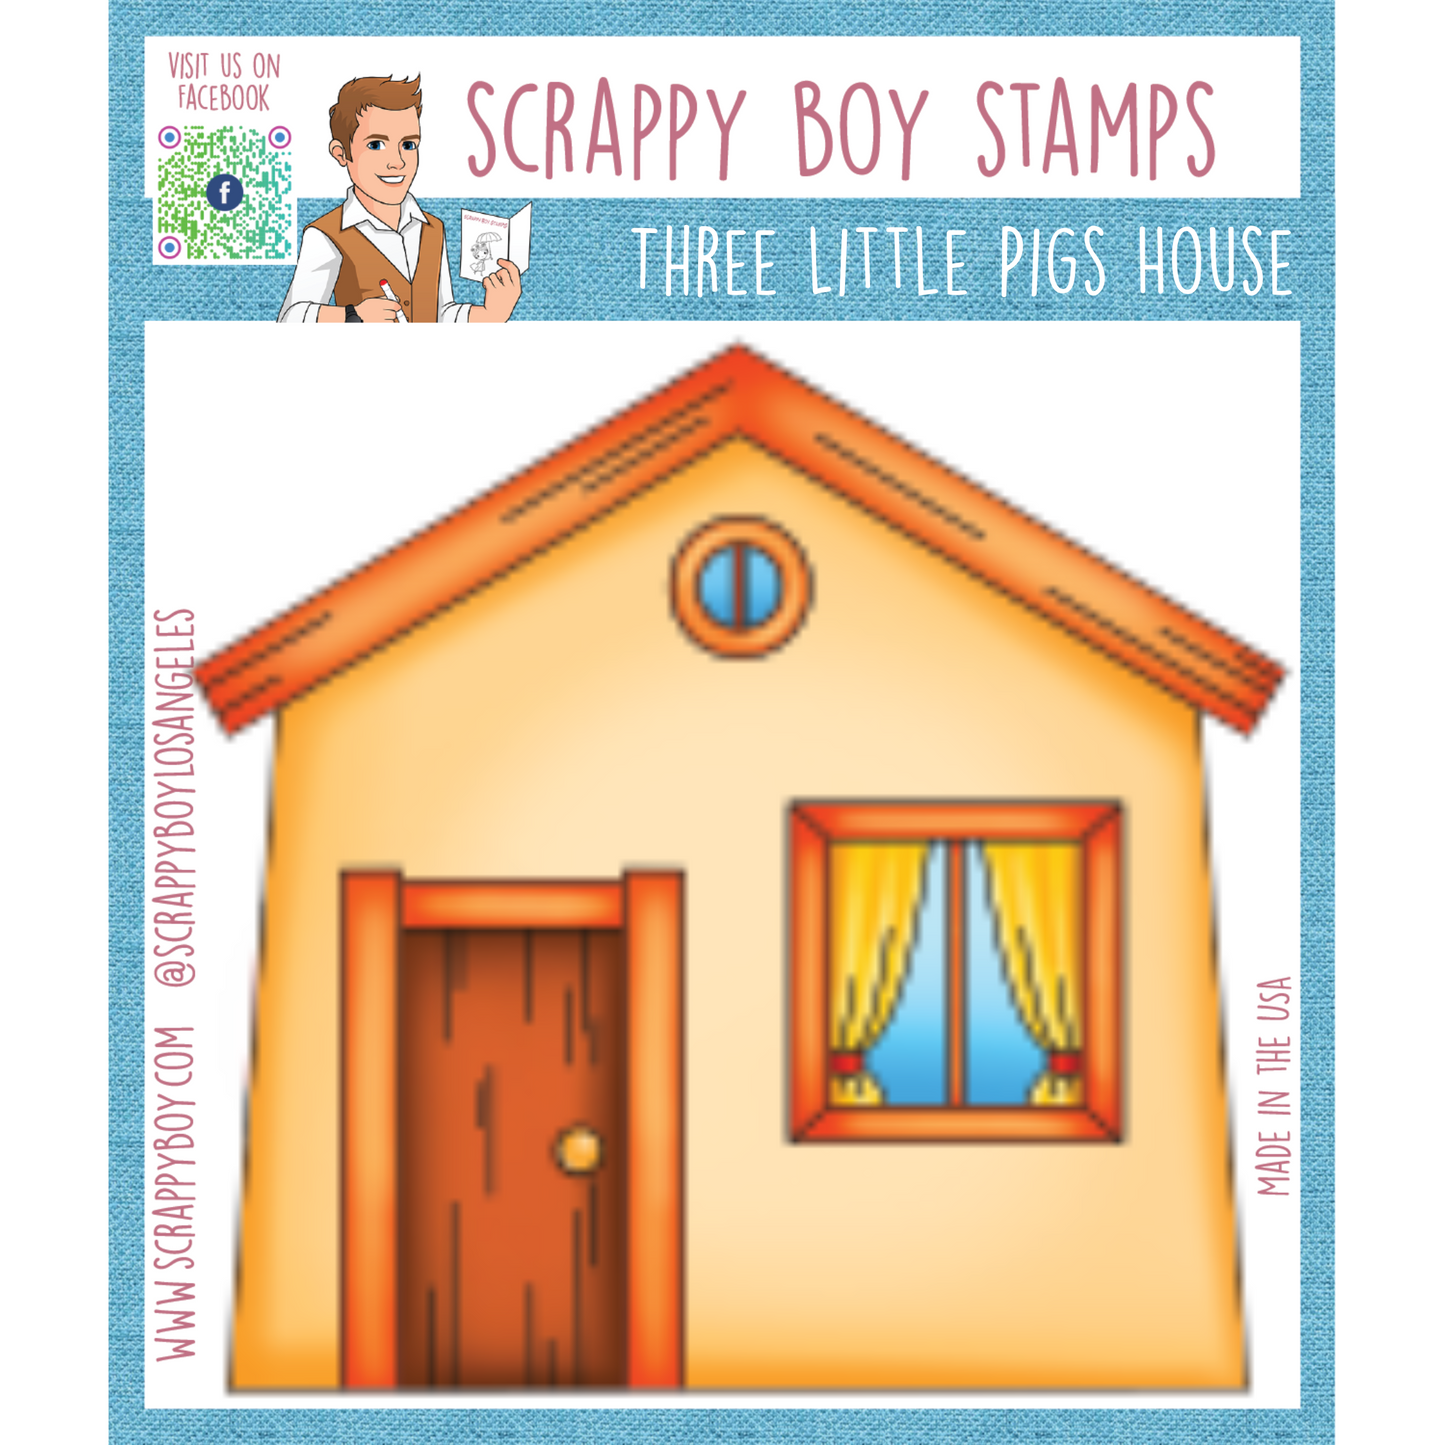 Three Little Pigs House - 4x4 Stamp Scrappy Boy Stamps